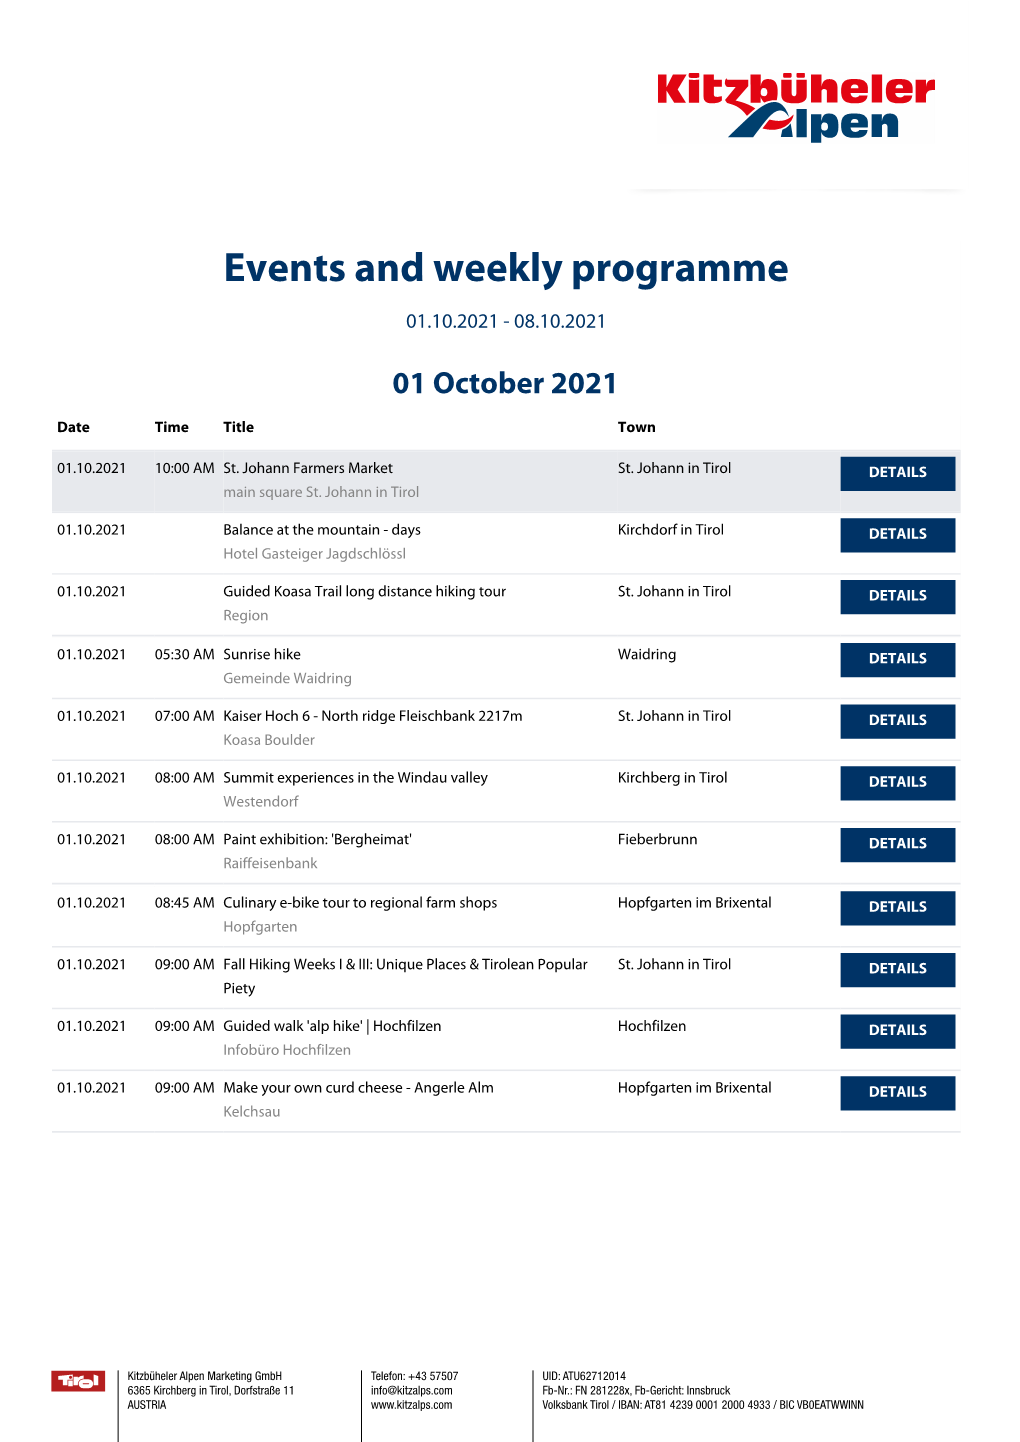 Events and Weekly Programme